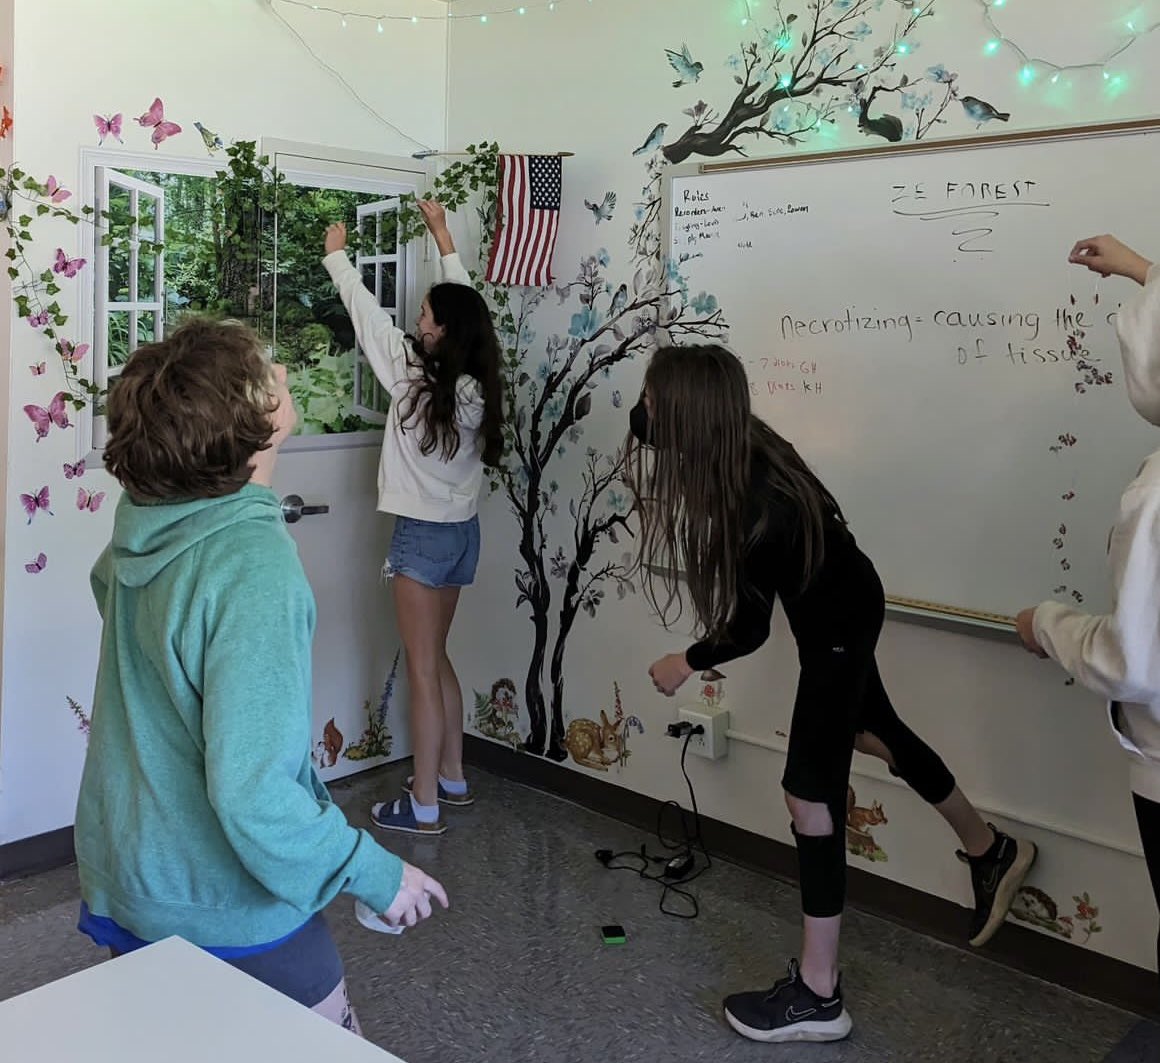 We're finishing our learning spaces-focused interdisciplinary project in which grades 6-8 students took data, proposed, changed and then executed classroom designs centered around Biomes.